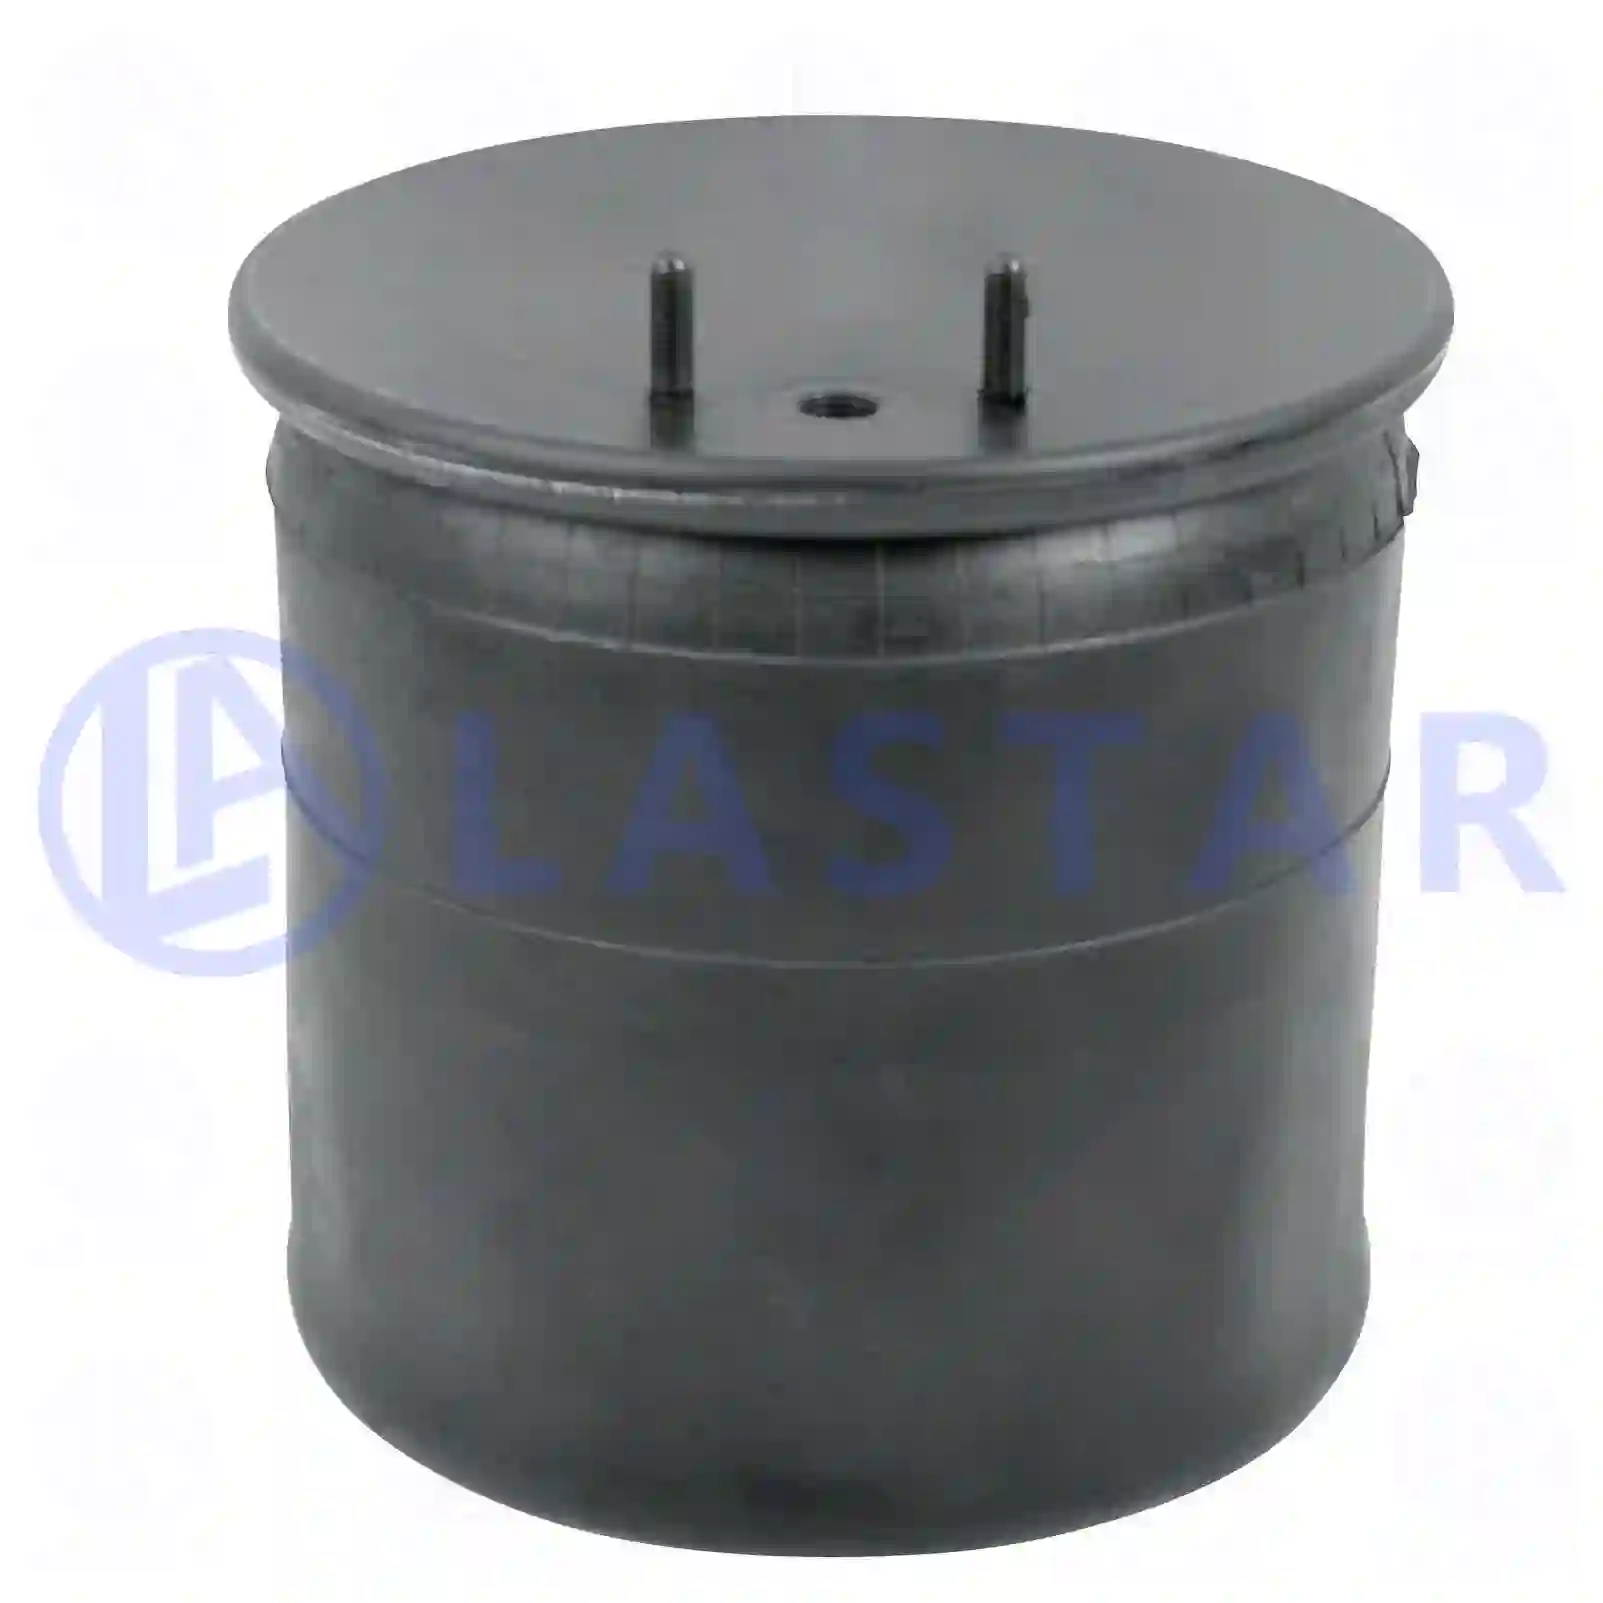 Air spring, with steel piston, 77726986, 20573311, 3195091, 9959514, ZG40750-0008, ||  77726986 Lastar Spare Part | Truck Spare Parts, Auotomotive Spare Parts Air spring, with steel piston, 77726986, 20573311, 3195091, 9959514, ZG40750-0008, ||  77726986 Lastar Spare Part | Truck Spare Parts, Auotomotive Spare Parts